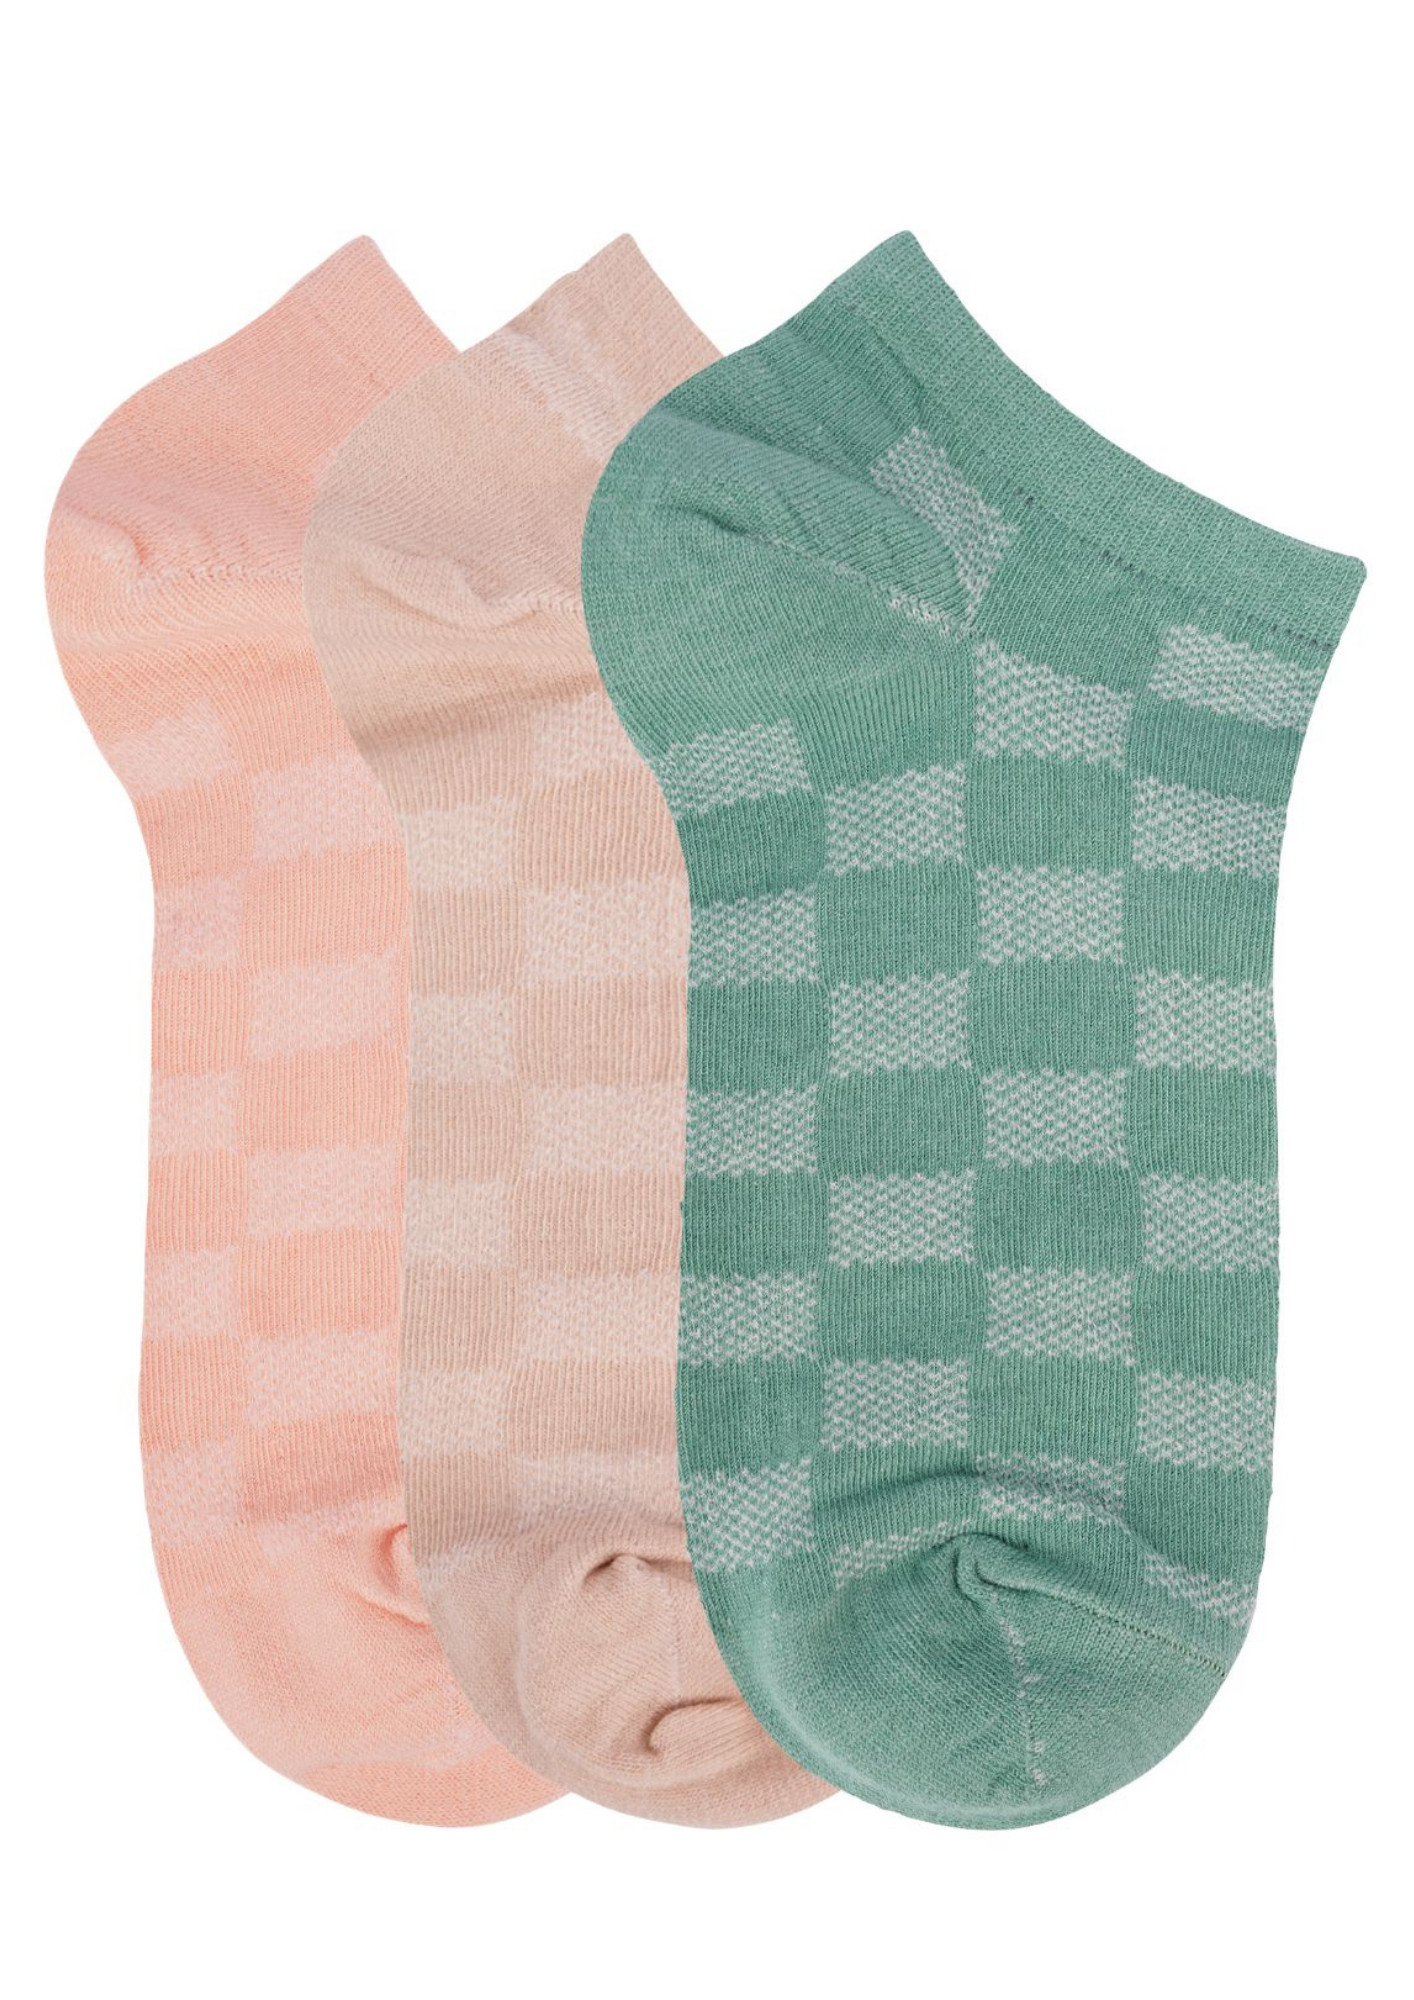 N2S NEXT2SKIN Women's Low Ankle Length Check Pattern Cotton Socks (Pack of 3) (Peach:Skin:Green)